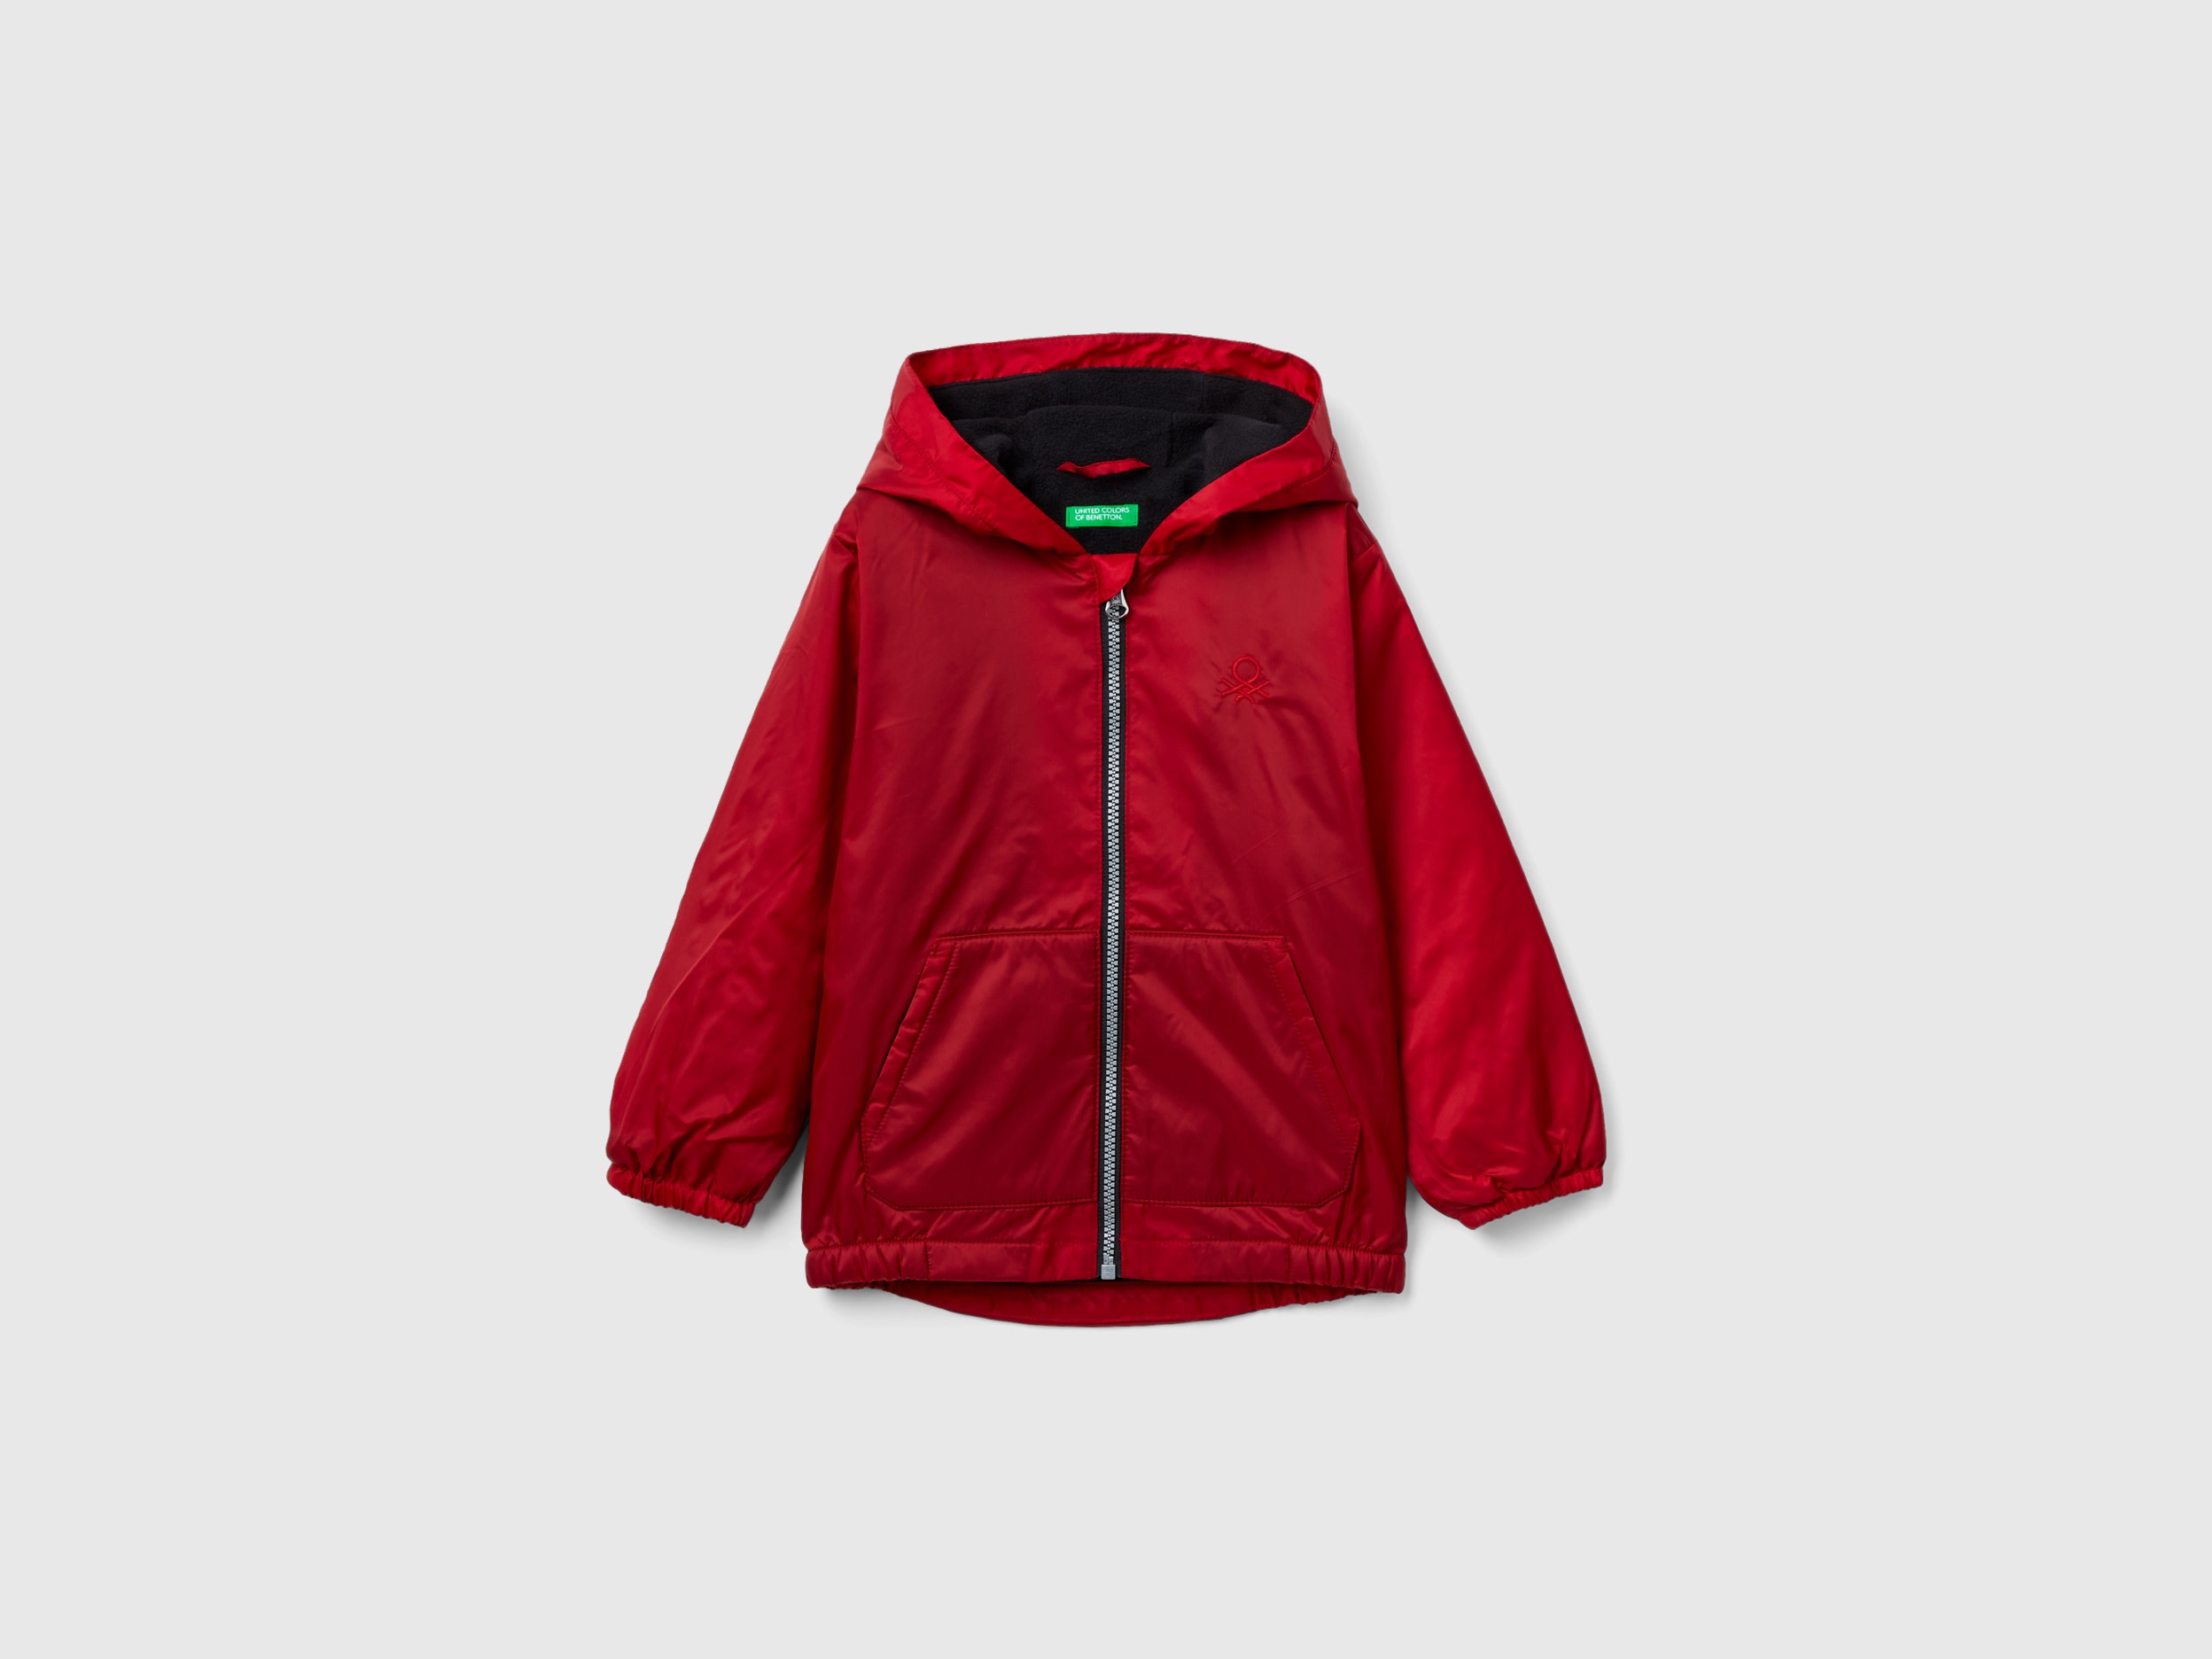 Benetton, Jacket With Oversized Hood, size 12-18, Red, Kids